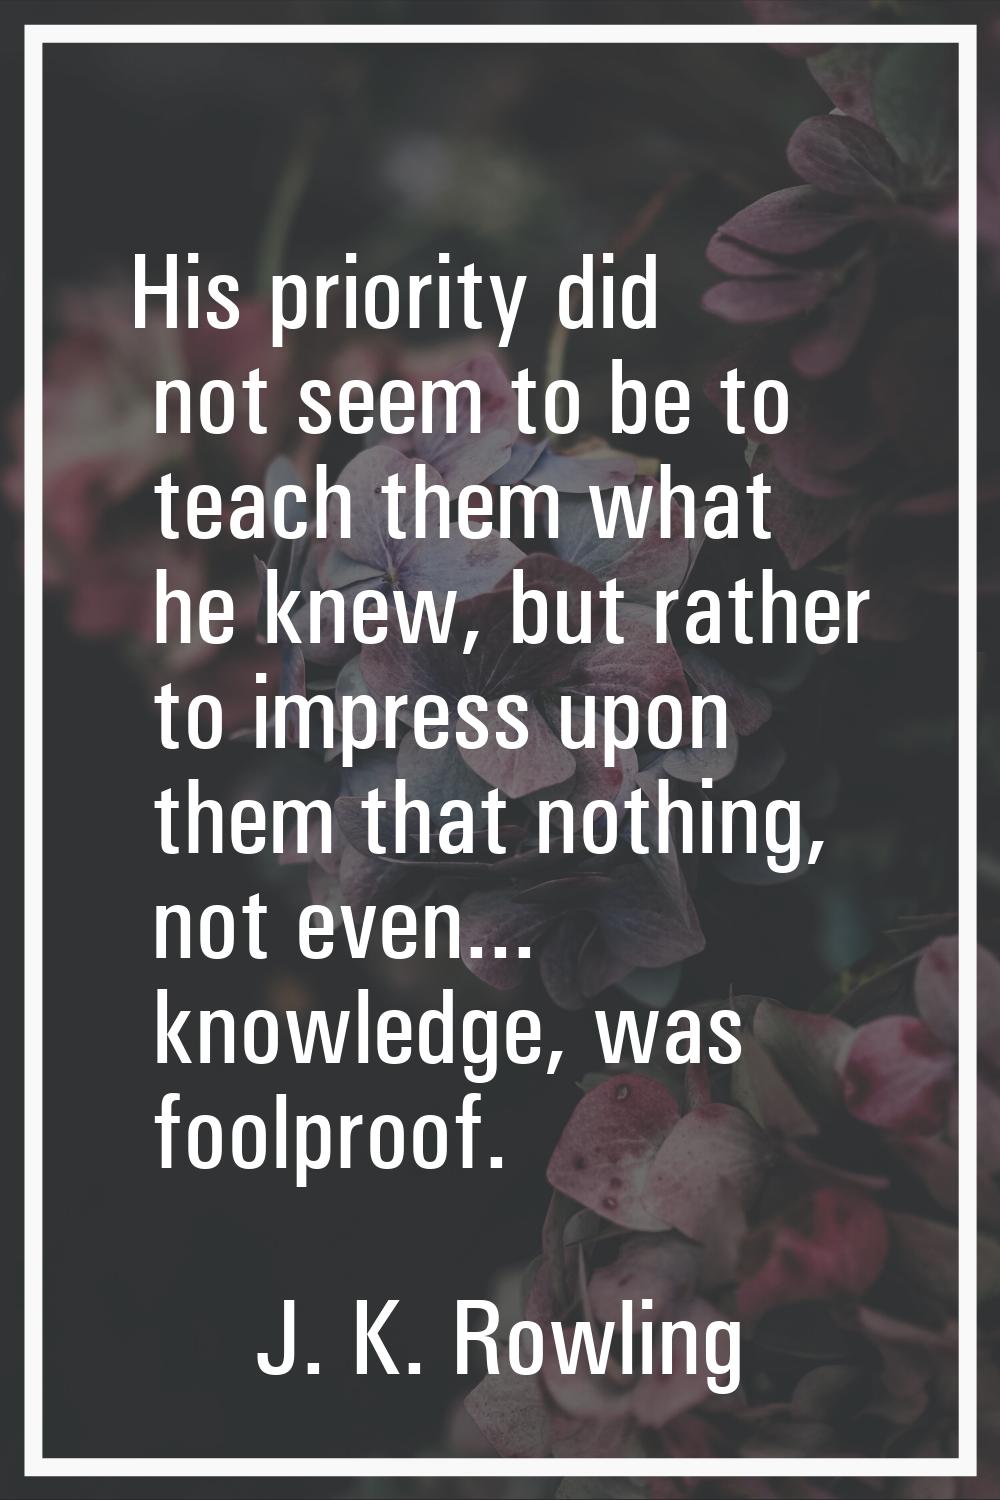 His priority did not seem to be to teach them what he knew, but rather to impress upon them that no